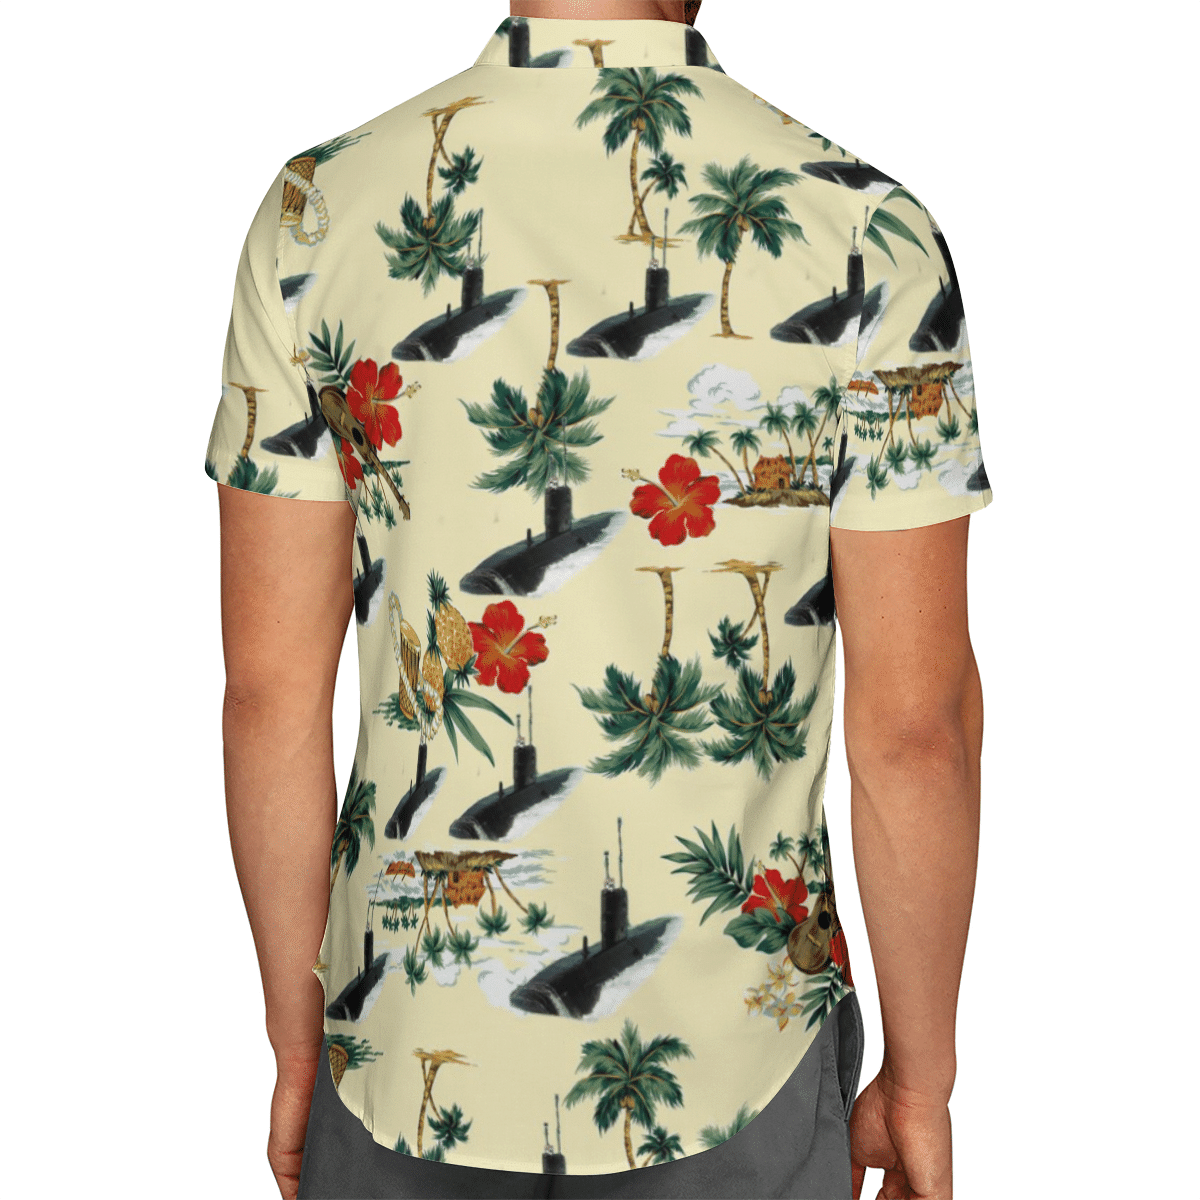 Going to the beach with a quality shirt 161